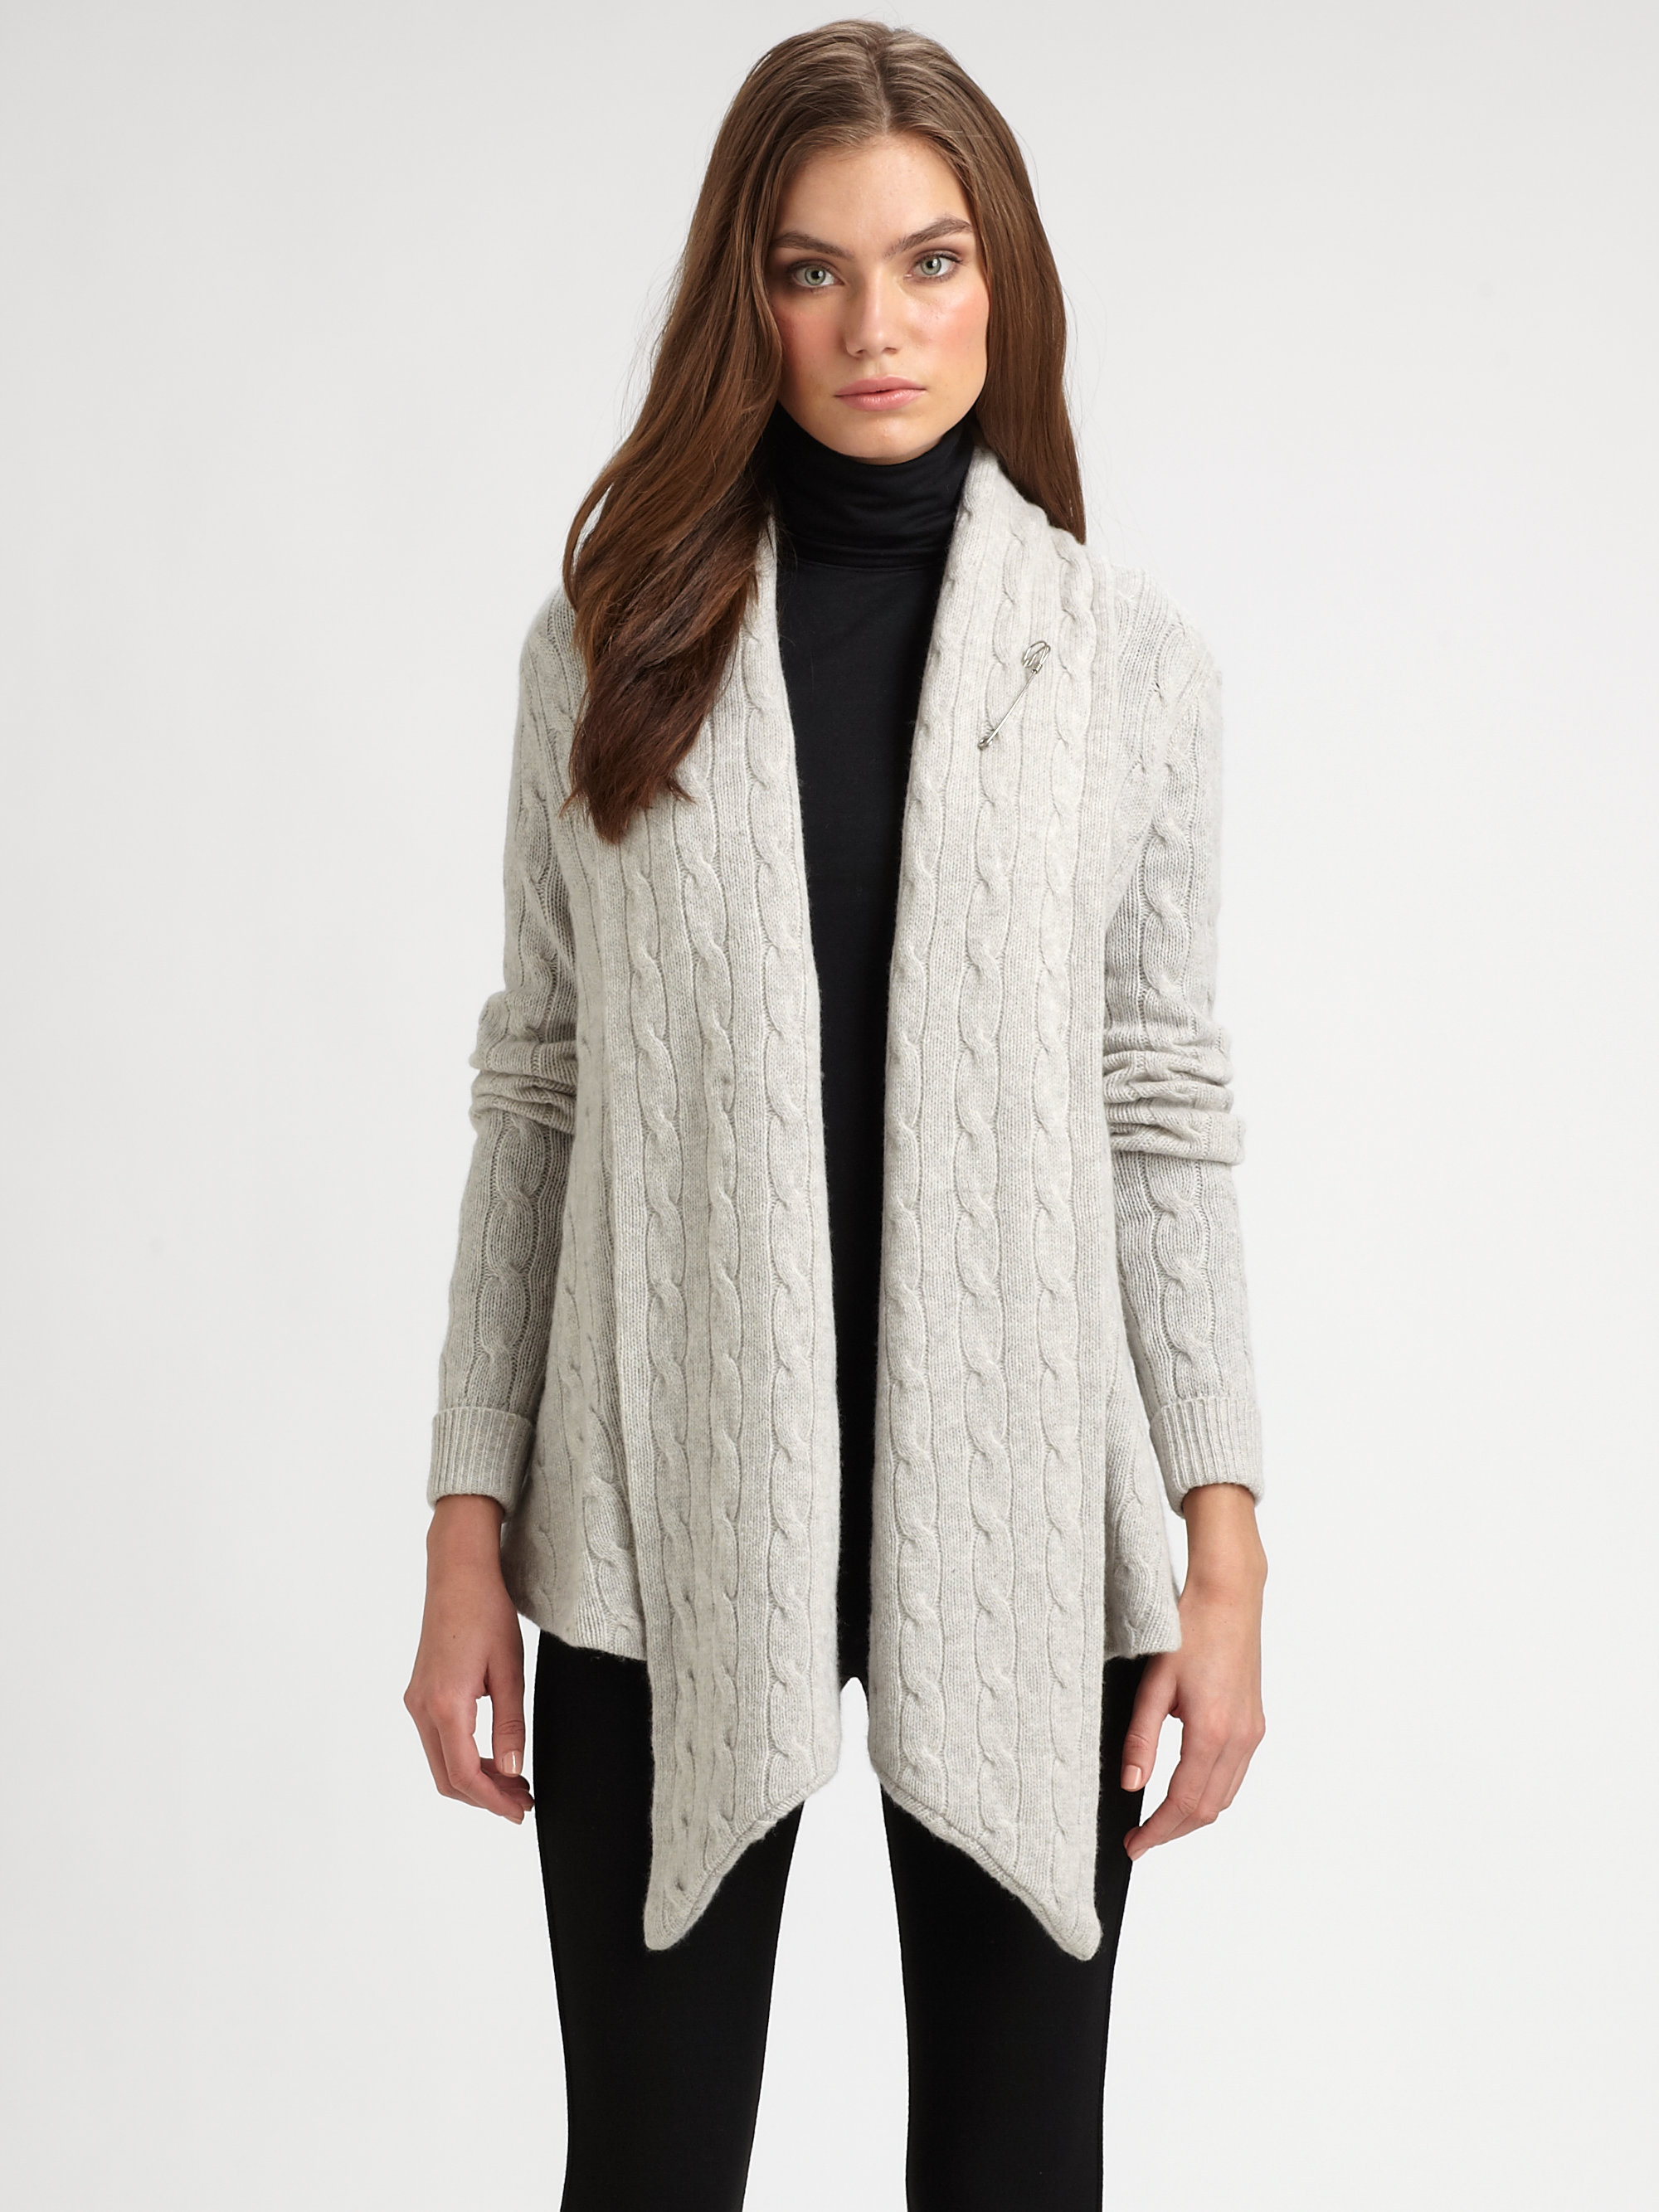 Lyst - Ralph Lauren Blue Label Drape Front Cable Cardigan in Gray